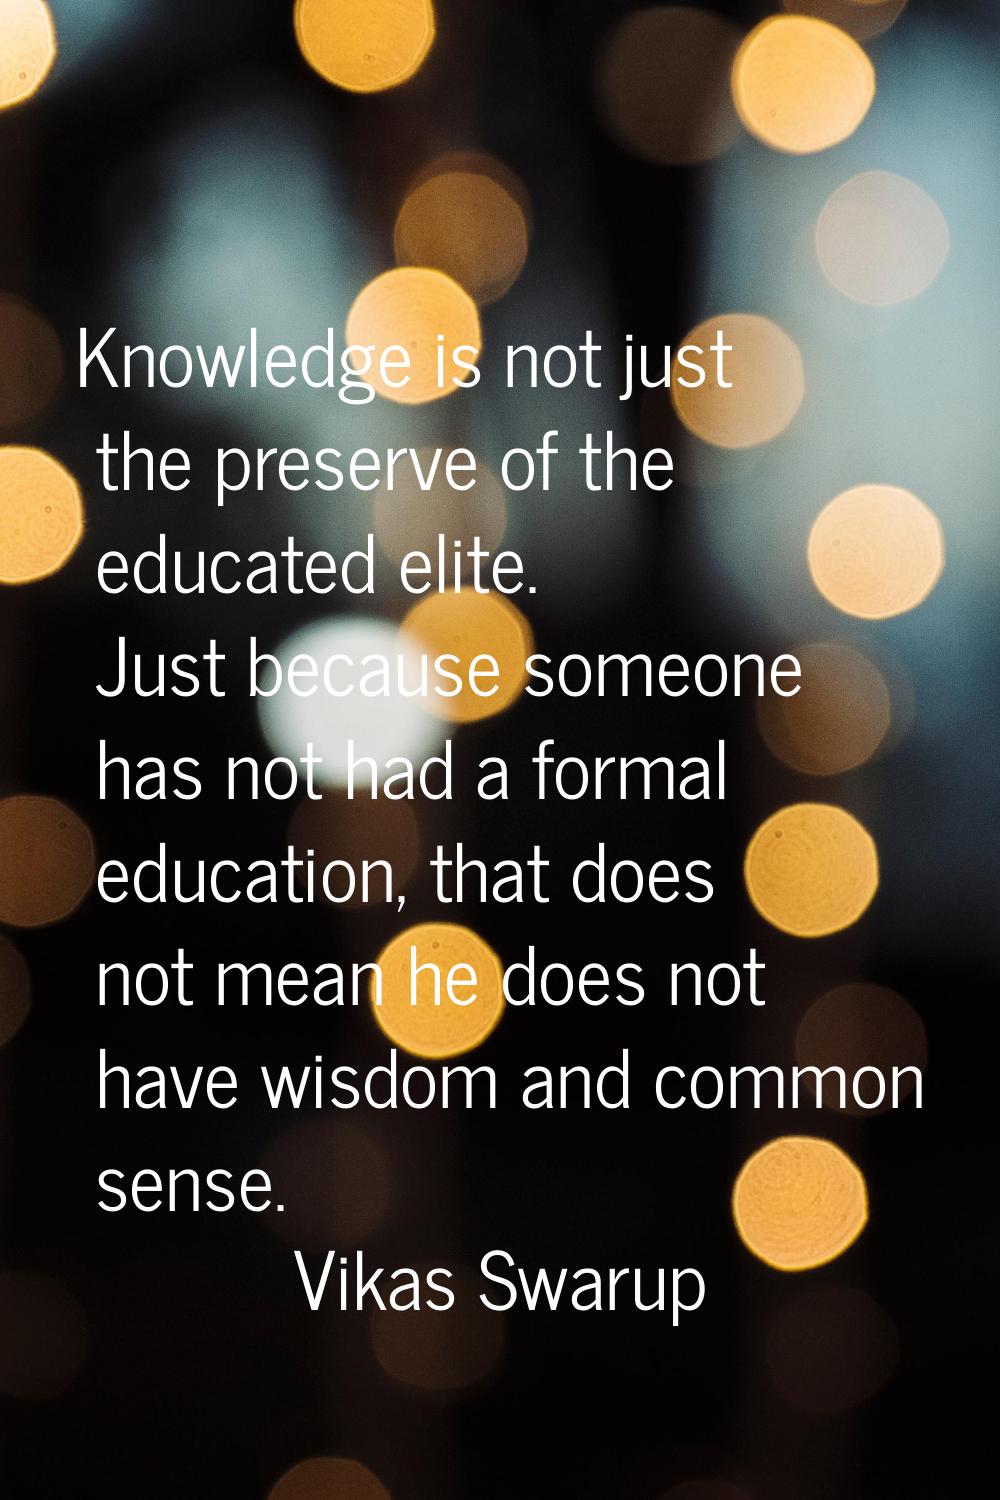 Knowledge is not just the preserve of the educated elite. Just because someone has not had a formal